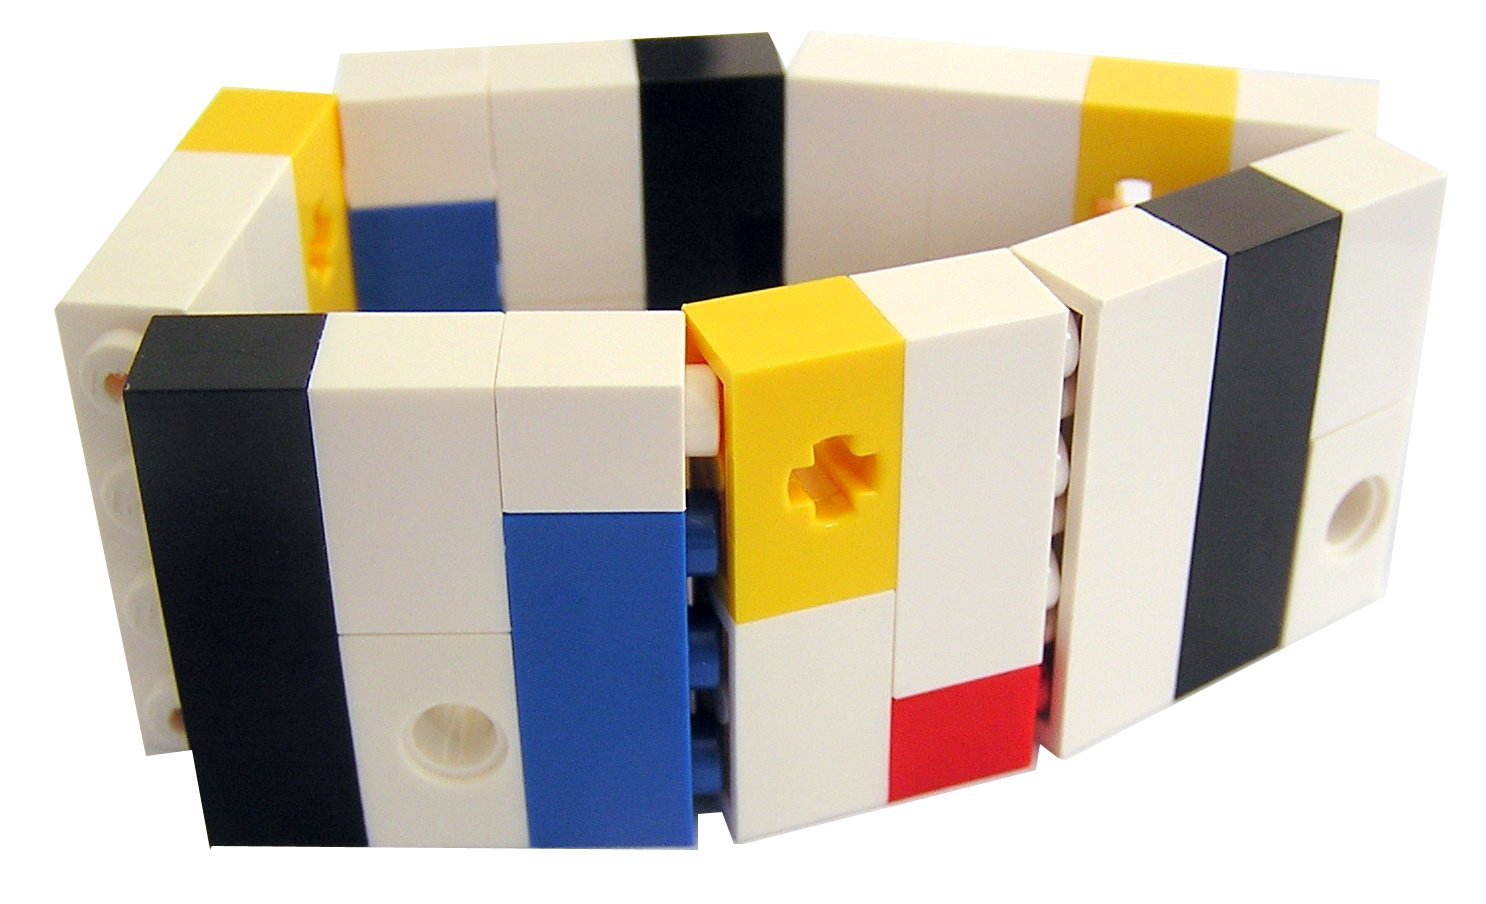 ​Collectible bracelet Model 5 - made from LEGO® bricks on stretchy cords - MONDRIAN